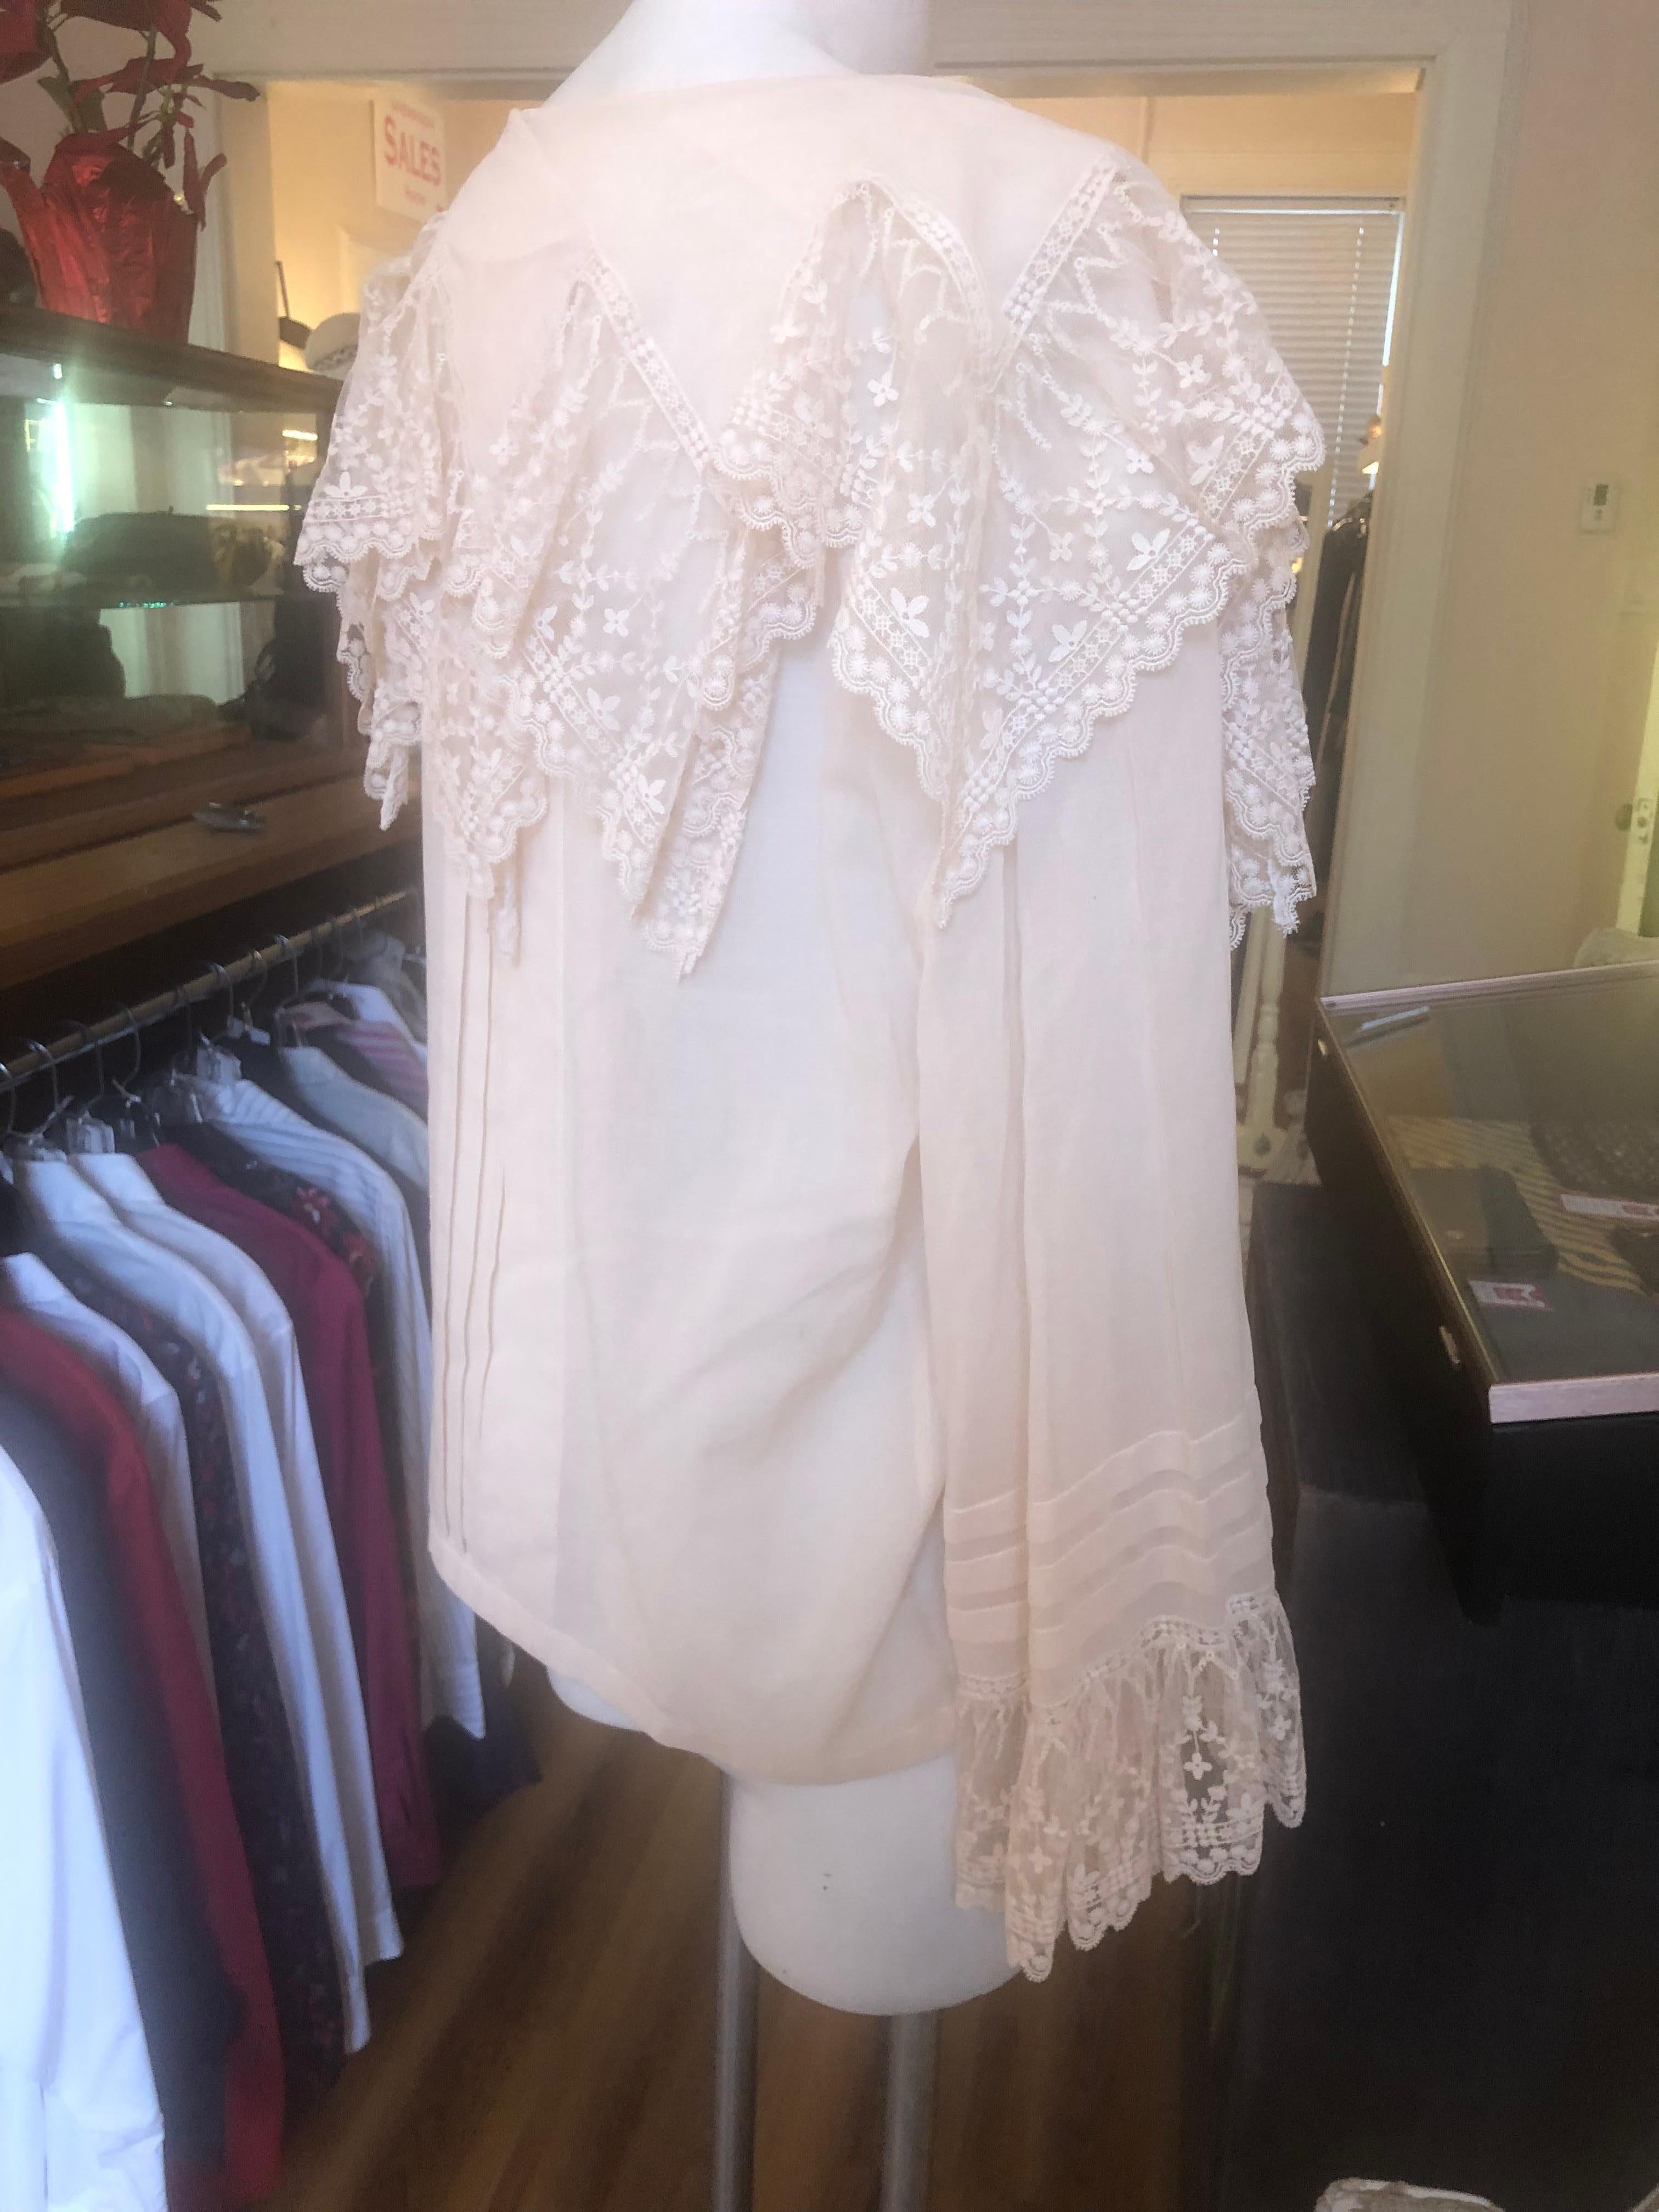 This is a spectacular never worn ecru cotton blouse with lace around the collar, front and cape like at the back. Lace is also present on the cuff of the wide sleeves. There are also permanent pleats on the back, front, and sleeves. The buttons are